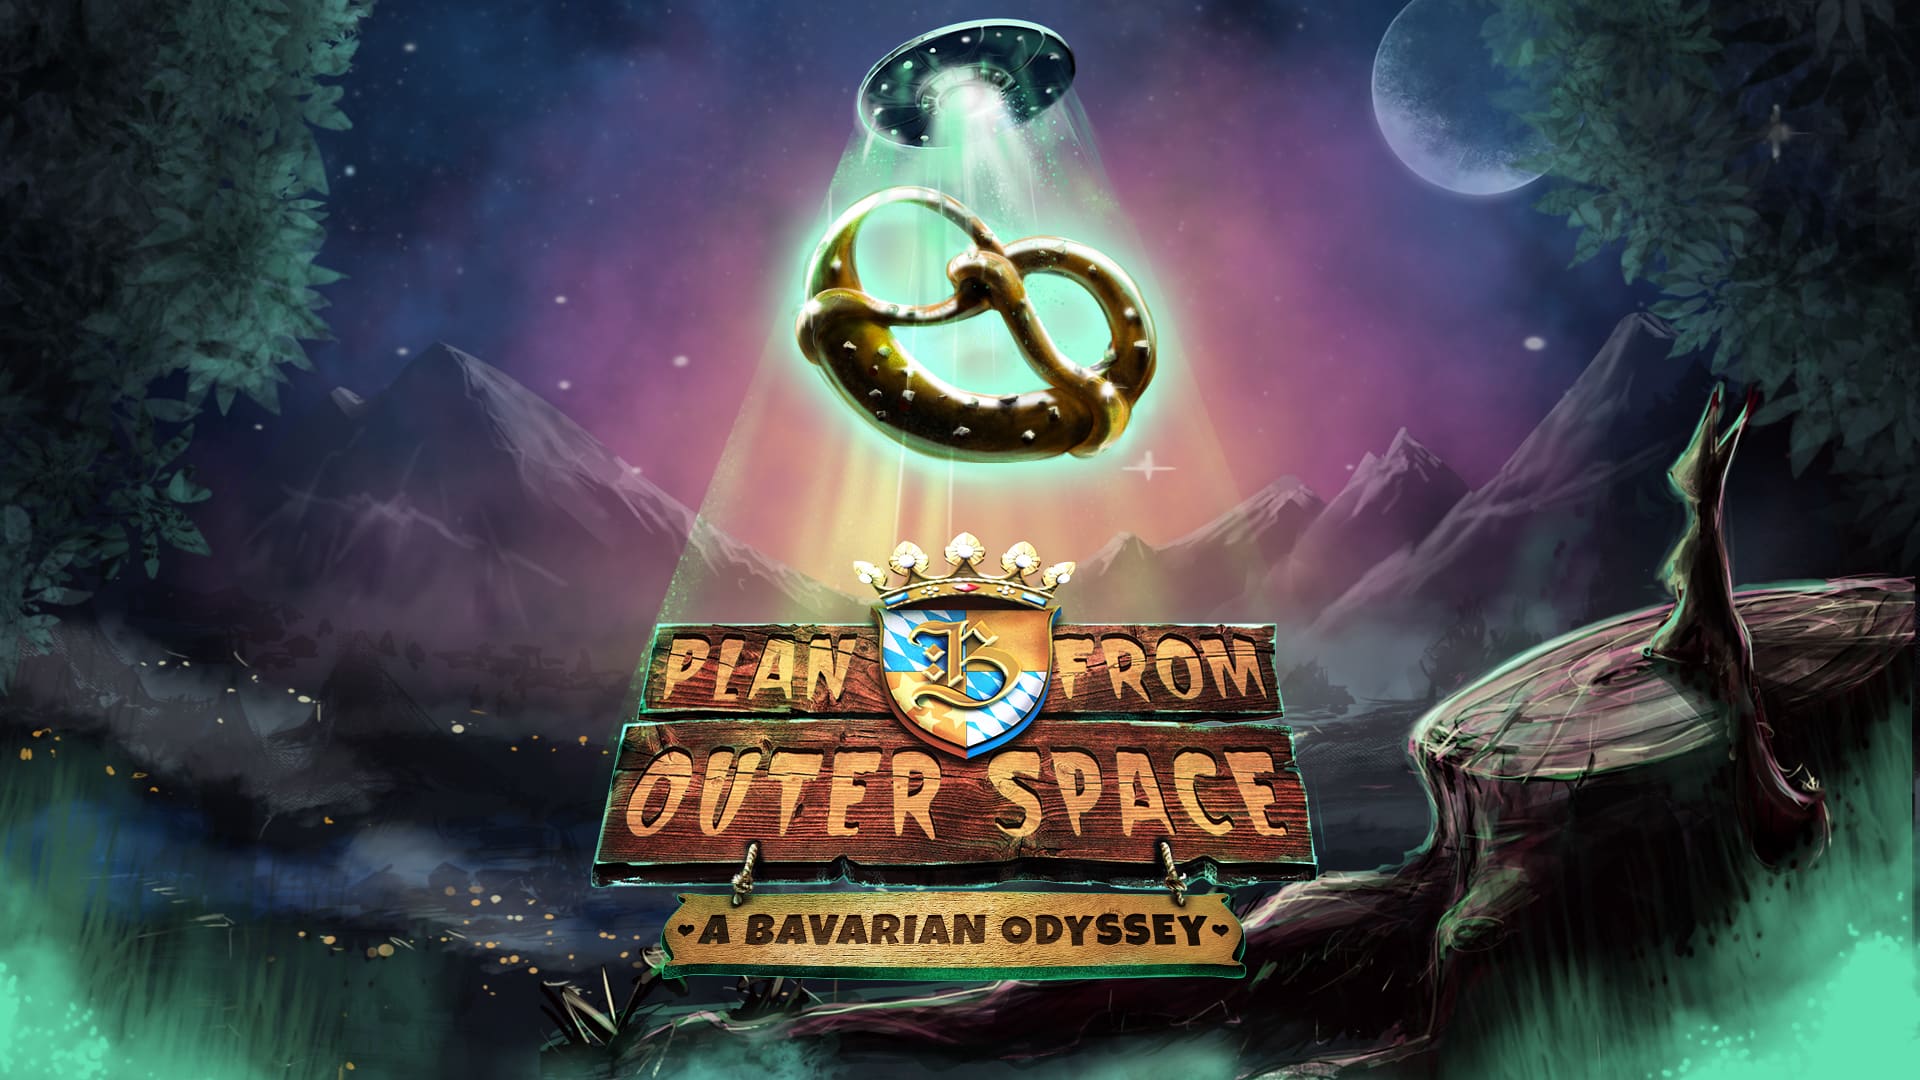 Plan B from Outer Space: A Bavarian Odyssey artwork